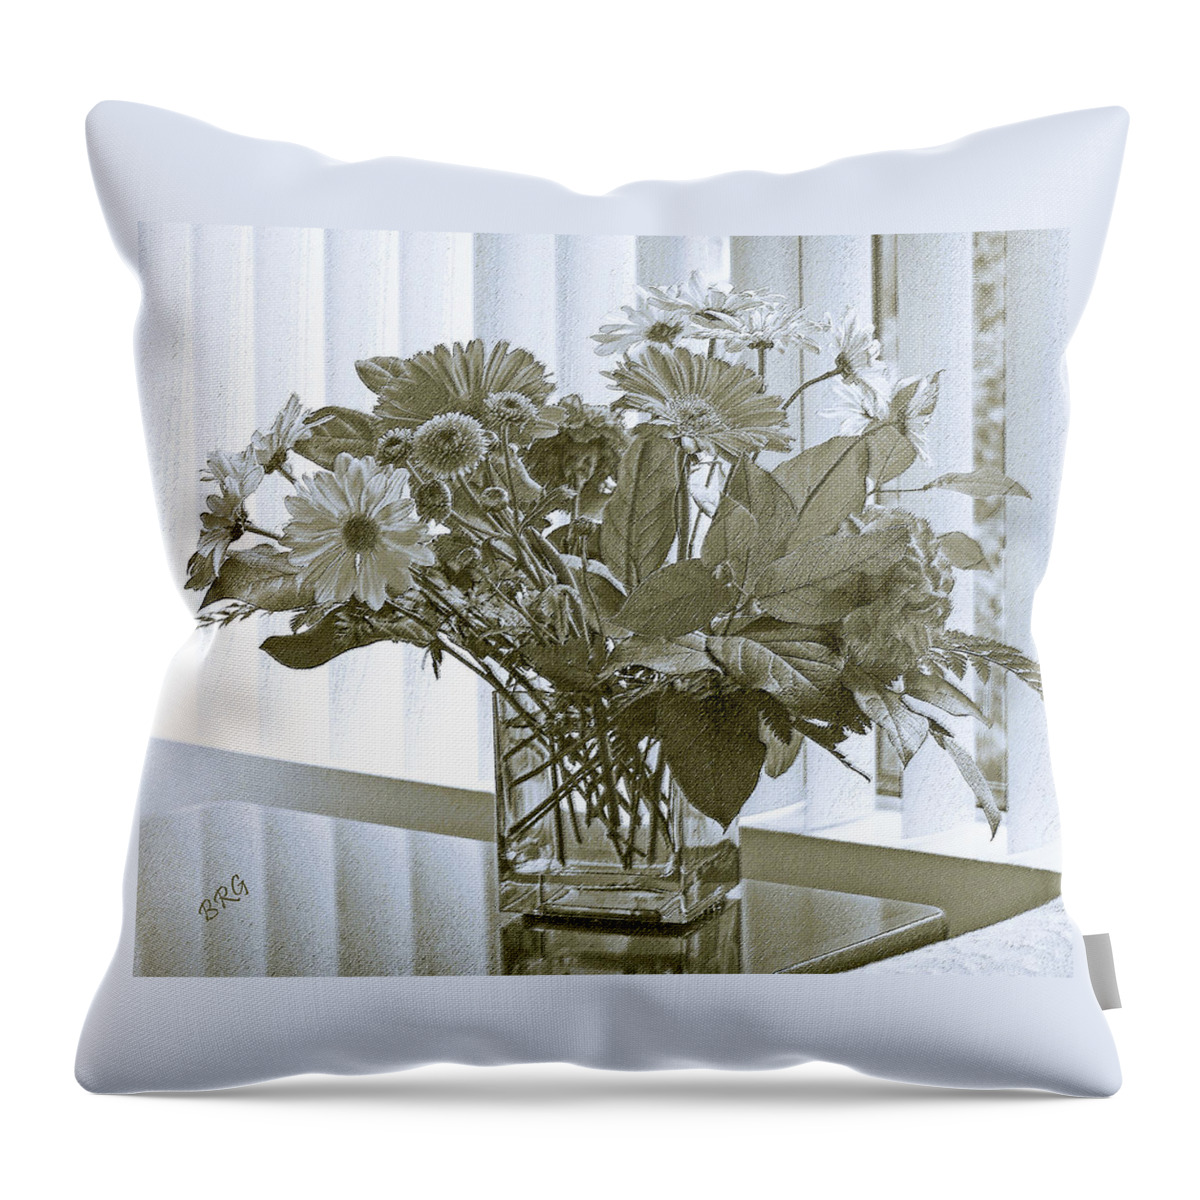 Floral Still Life Throw Pillow featuring the photograph Floral Arrangement With Blinds Reflection by Ben and Raisa Gertsberg